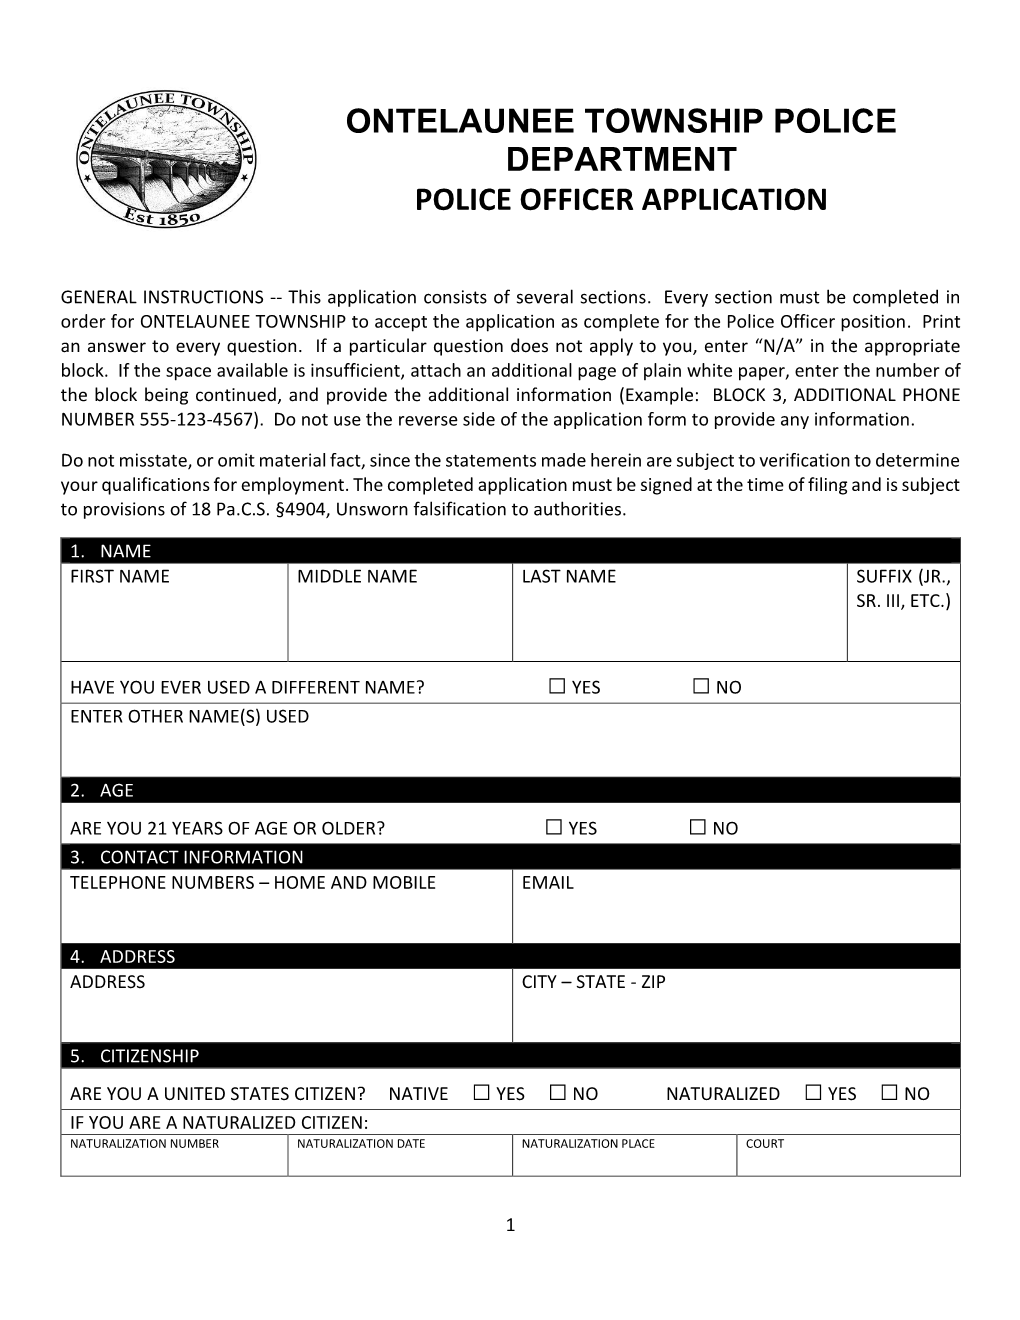 Ontelaunee Township Police Department Police Officer Application